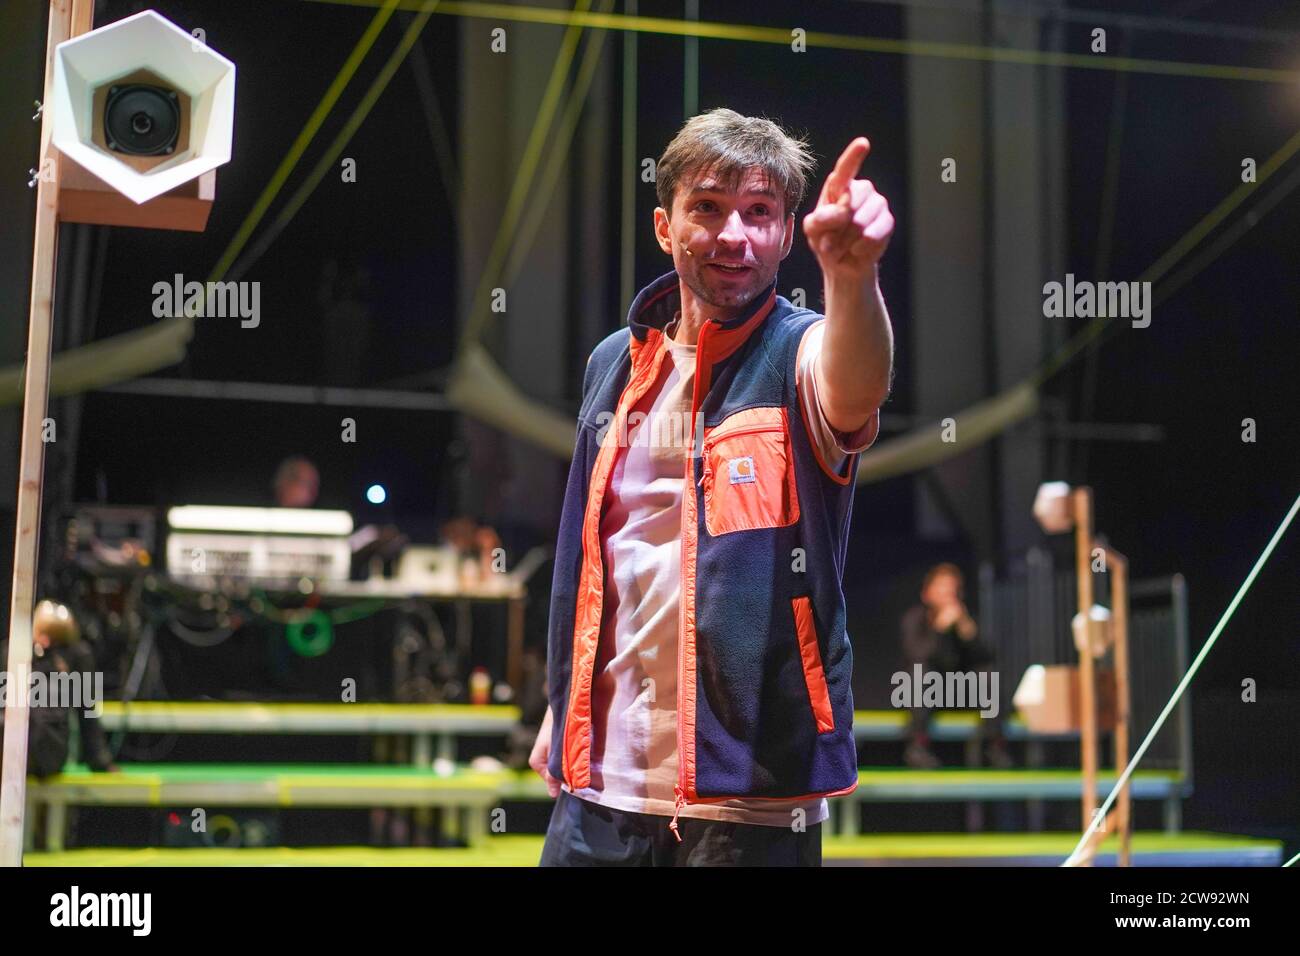 Berlin, Germany. 28th Sep, 2020. The performer Falk Rößler is standing at the photo rehearsal for the play "Waldesruh. Ein Zeltlager ohne Bäume" on the stage of the carpentry workshop of the Deutsche Oper. The play celebrates its premiere on October 02, 2020. Credit: Jörg Carstensen/dpa/Alamy Live News Stock Photo